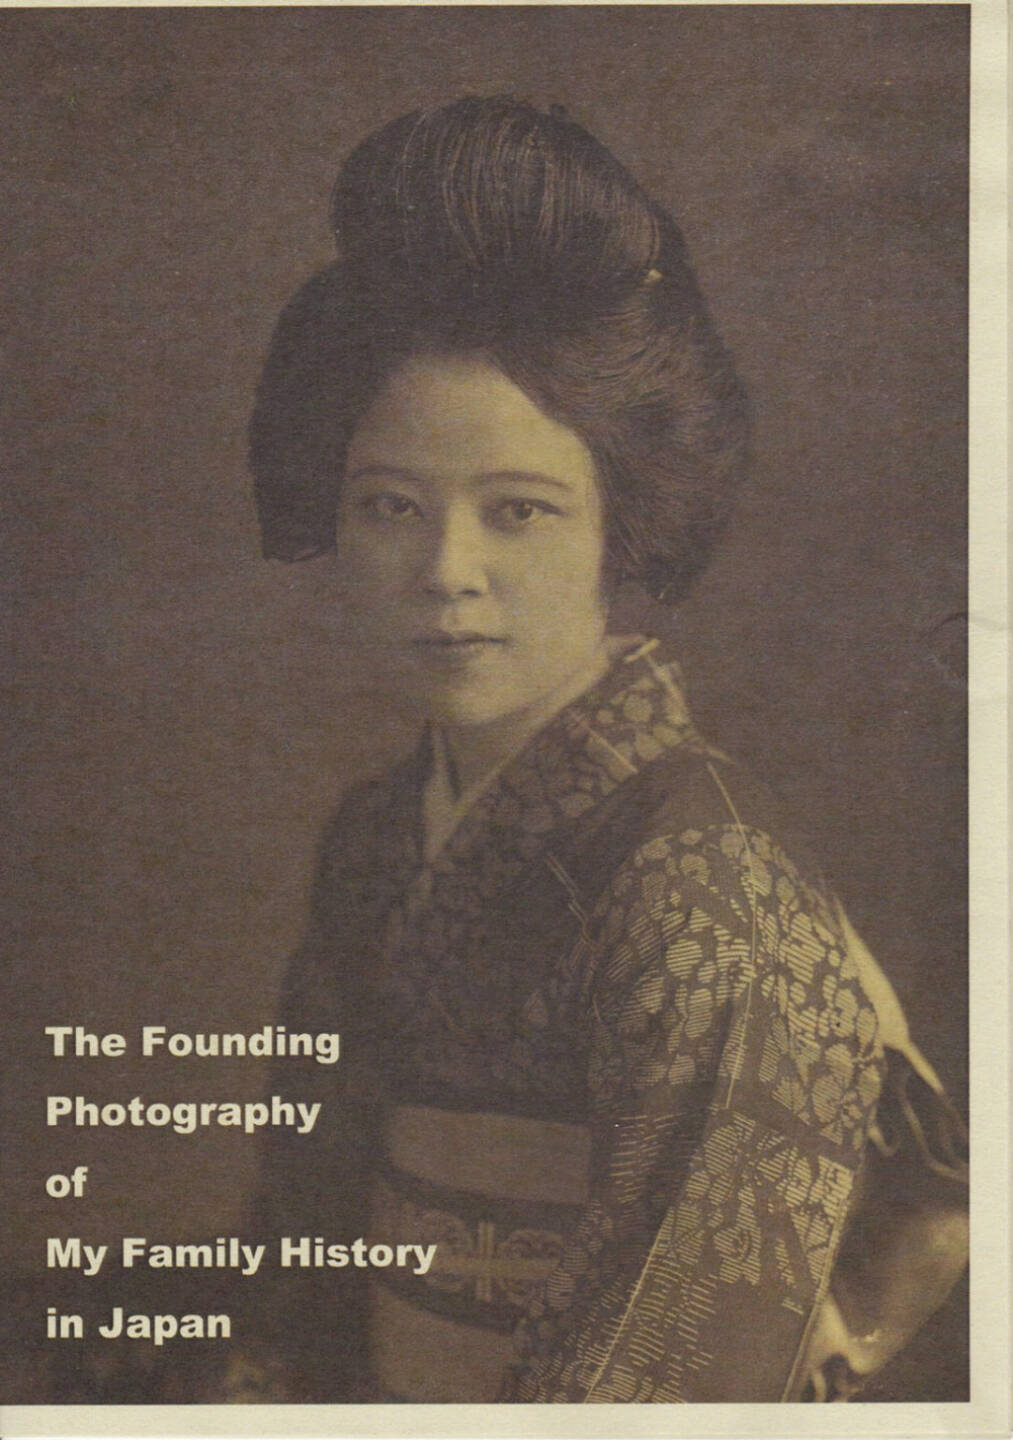 Gen Matsueda - The Founding Photography of My Family History in Japan, Self published, 2014, Cover - http://josefchladek.com/book/gen_matsueda_-_the_founding_photography_of_my_family_history_in_japan